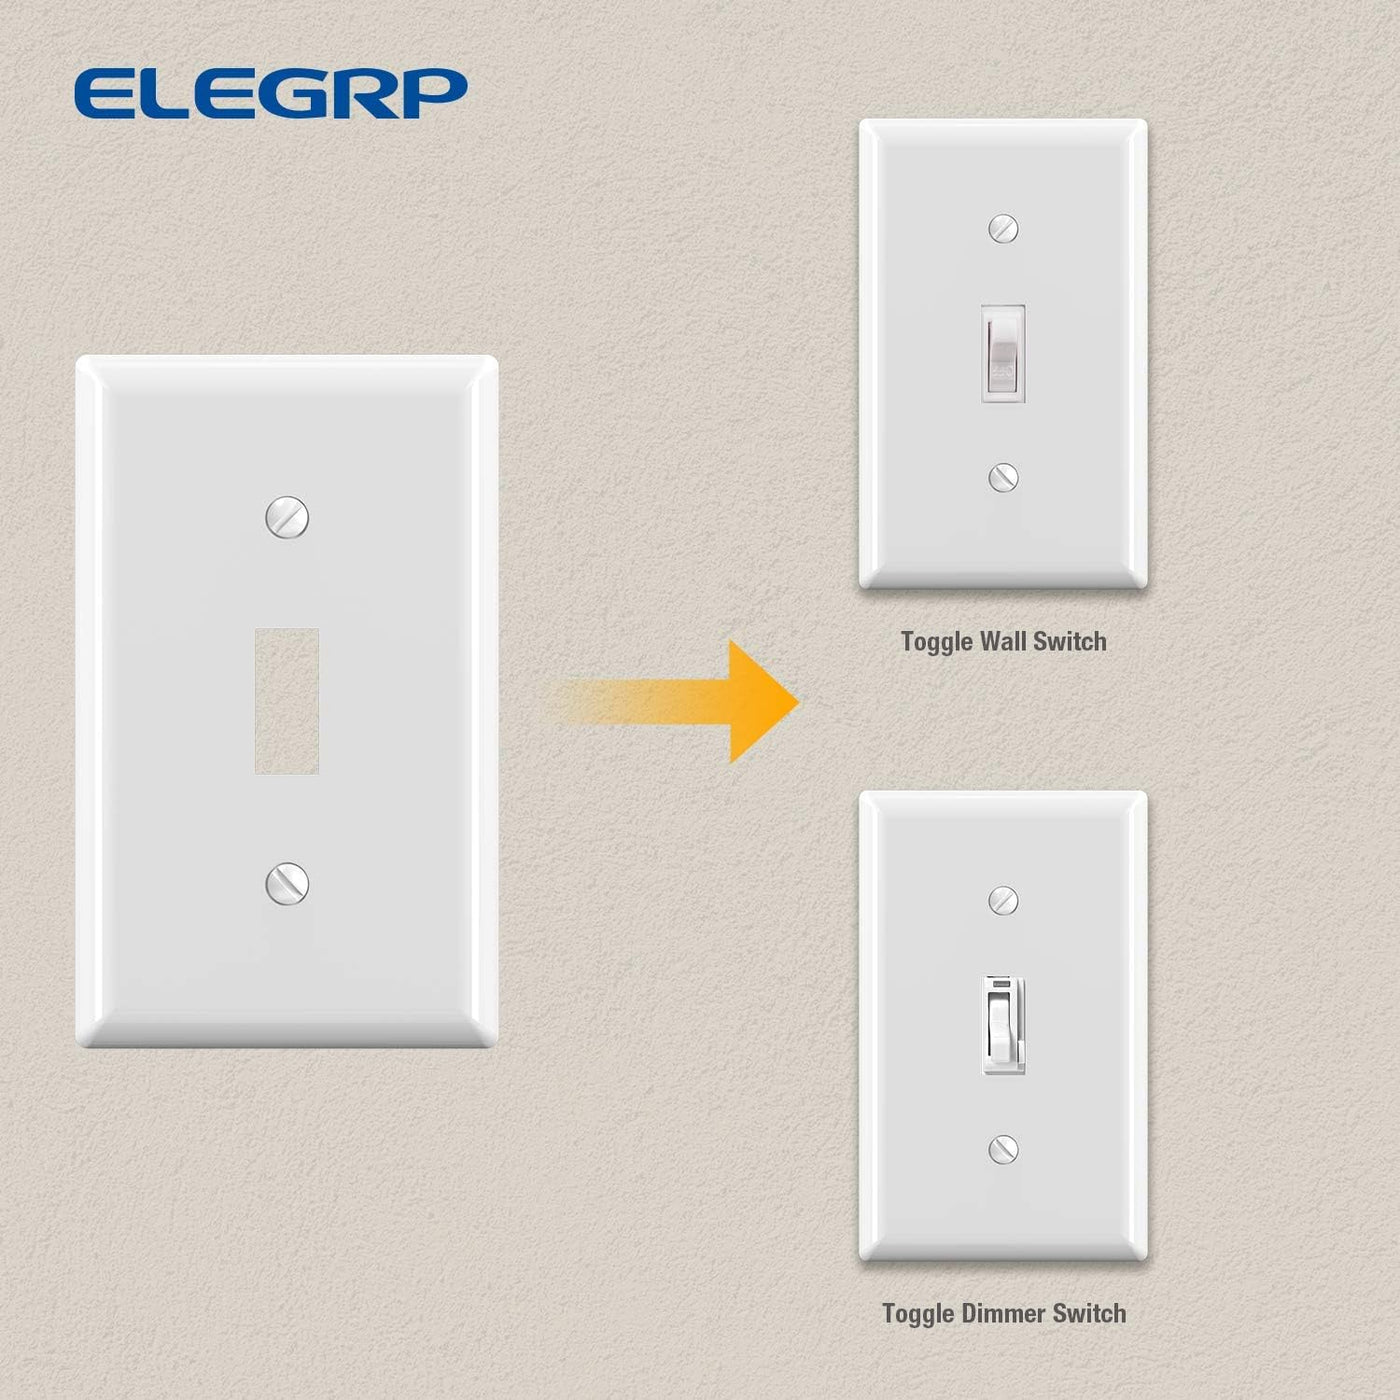 ELEGRP Toggle Light Switch Wall Plate, 1-Gang Standard Size Switch Covers, 10 Pack - $5